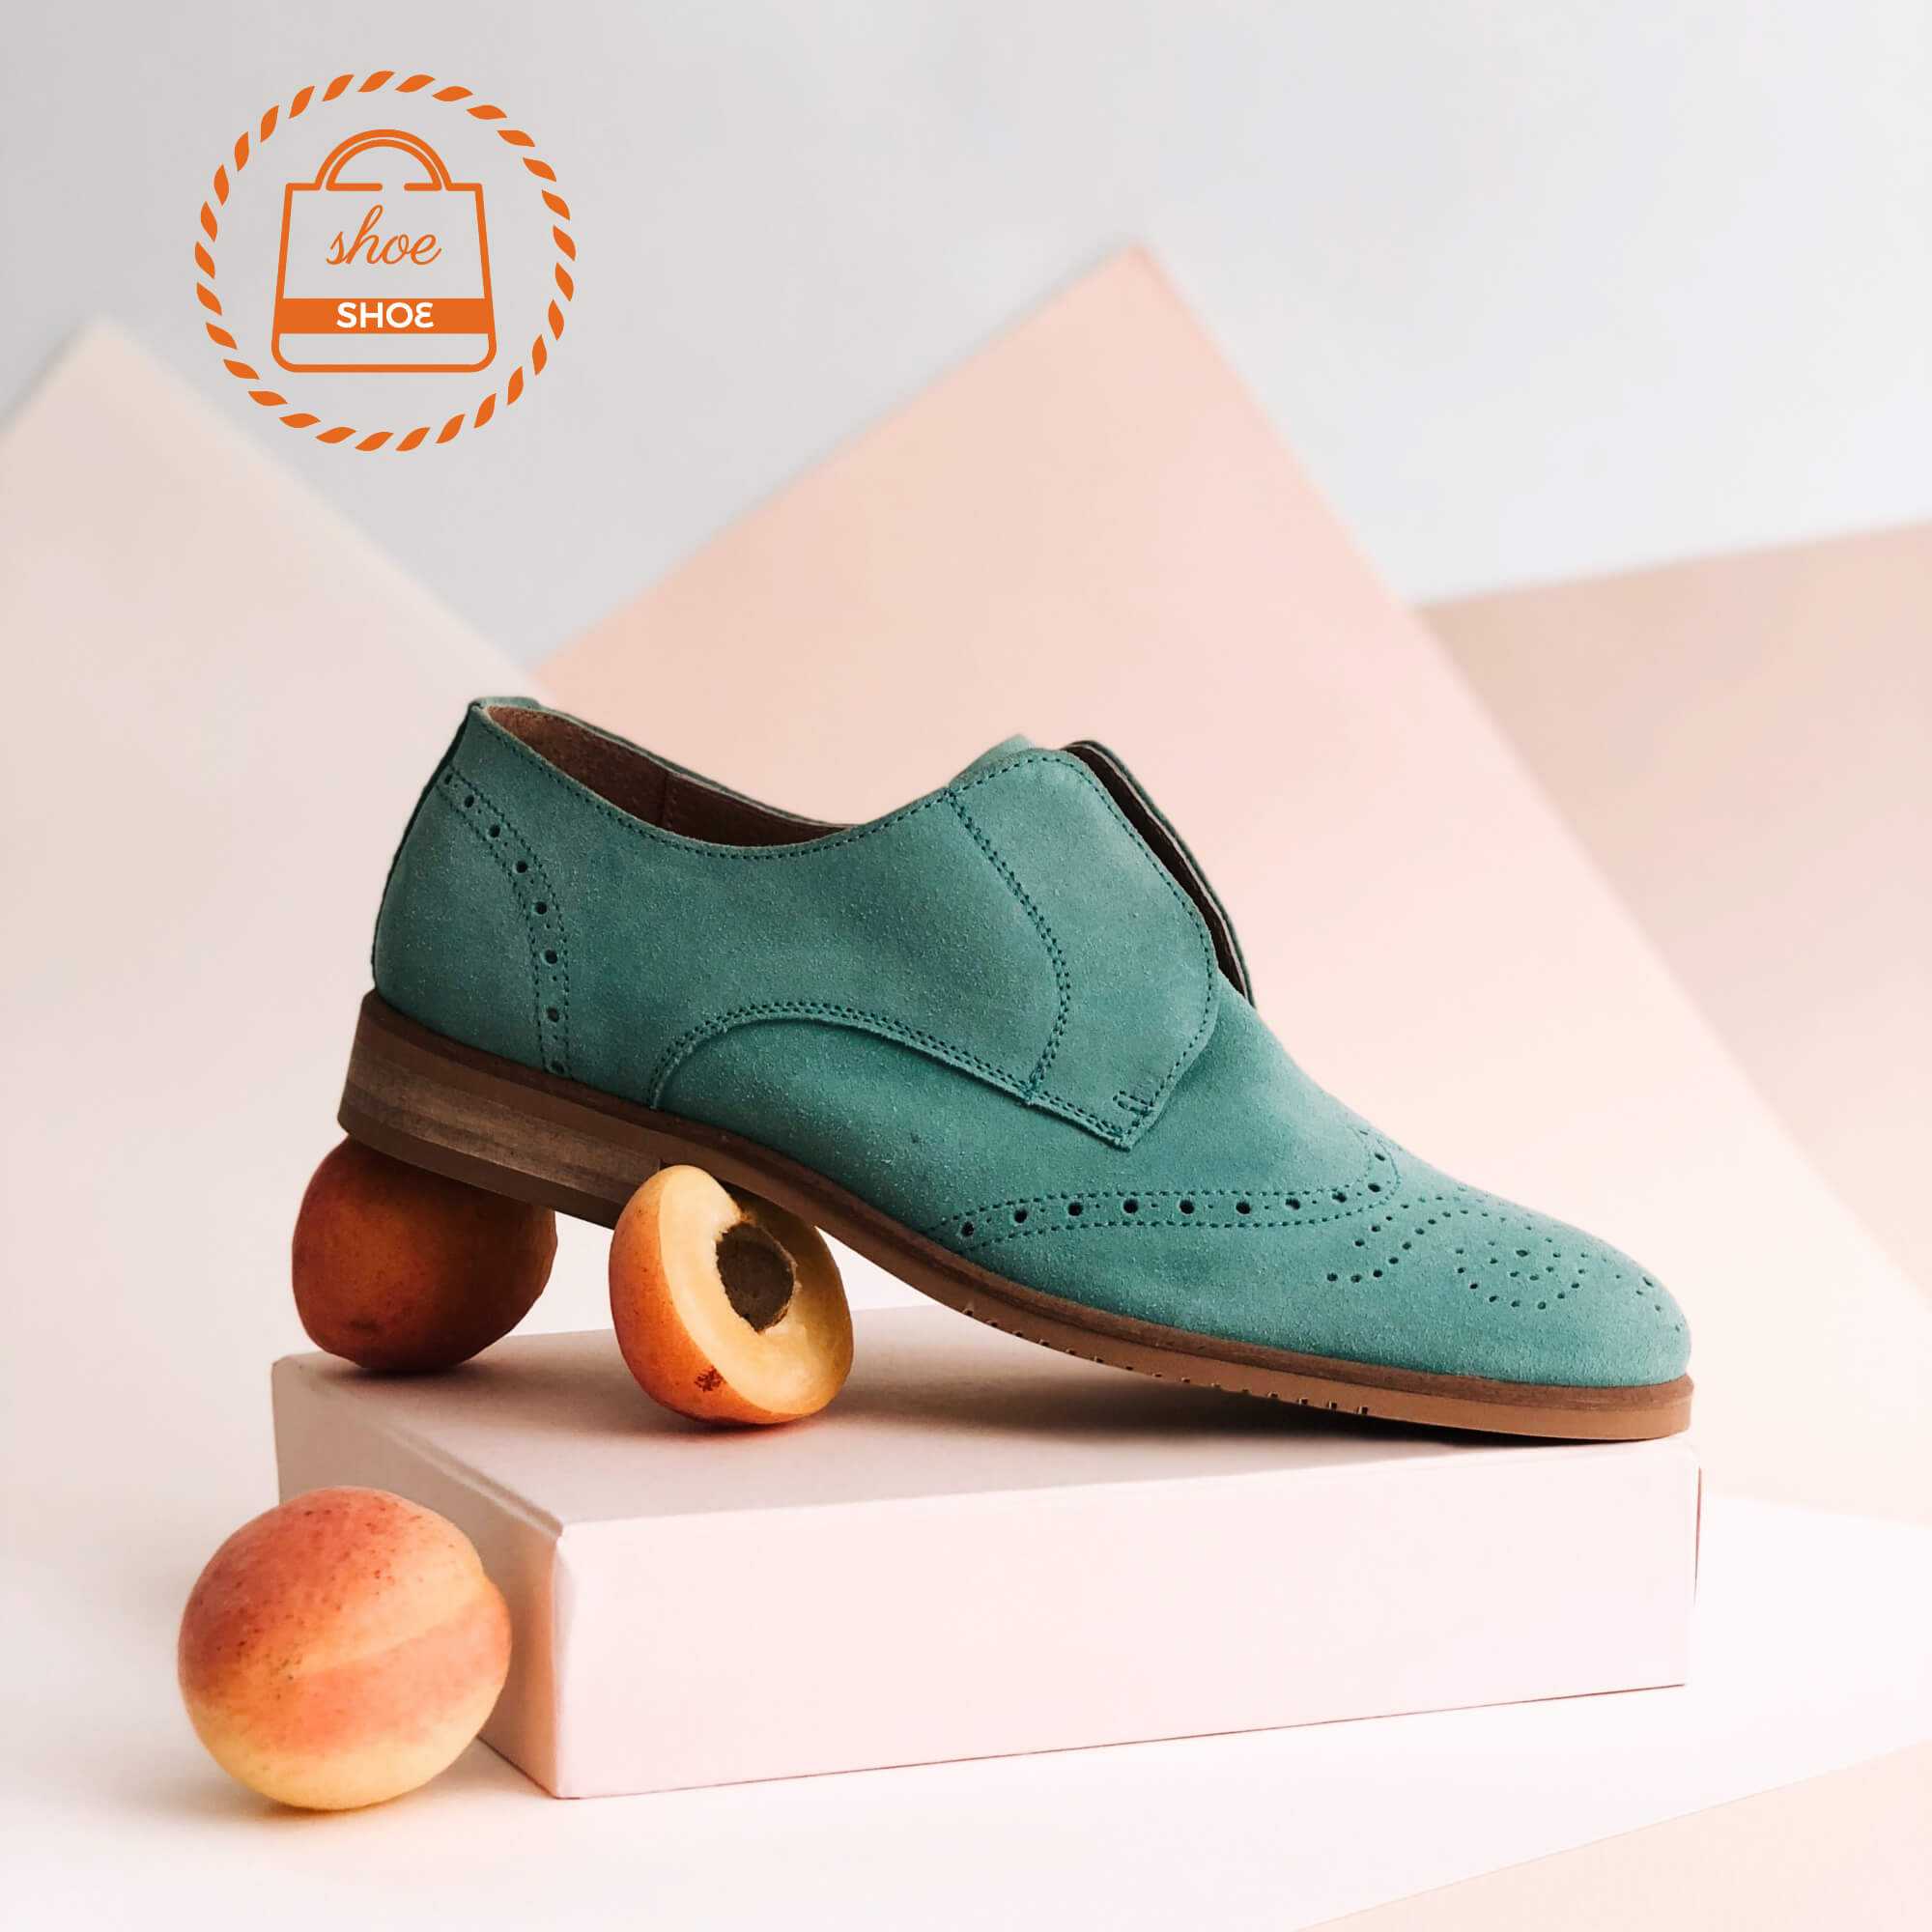 shoes product image with logo watermark